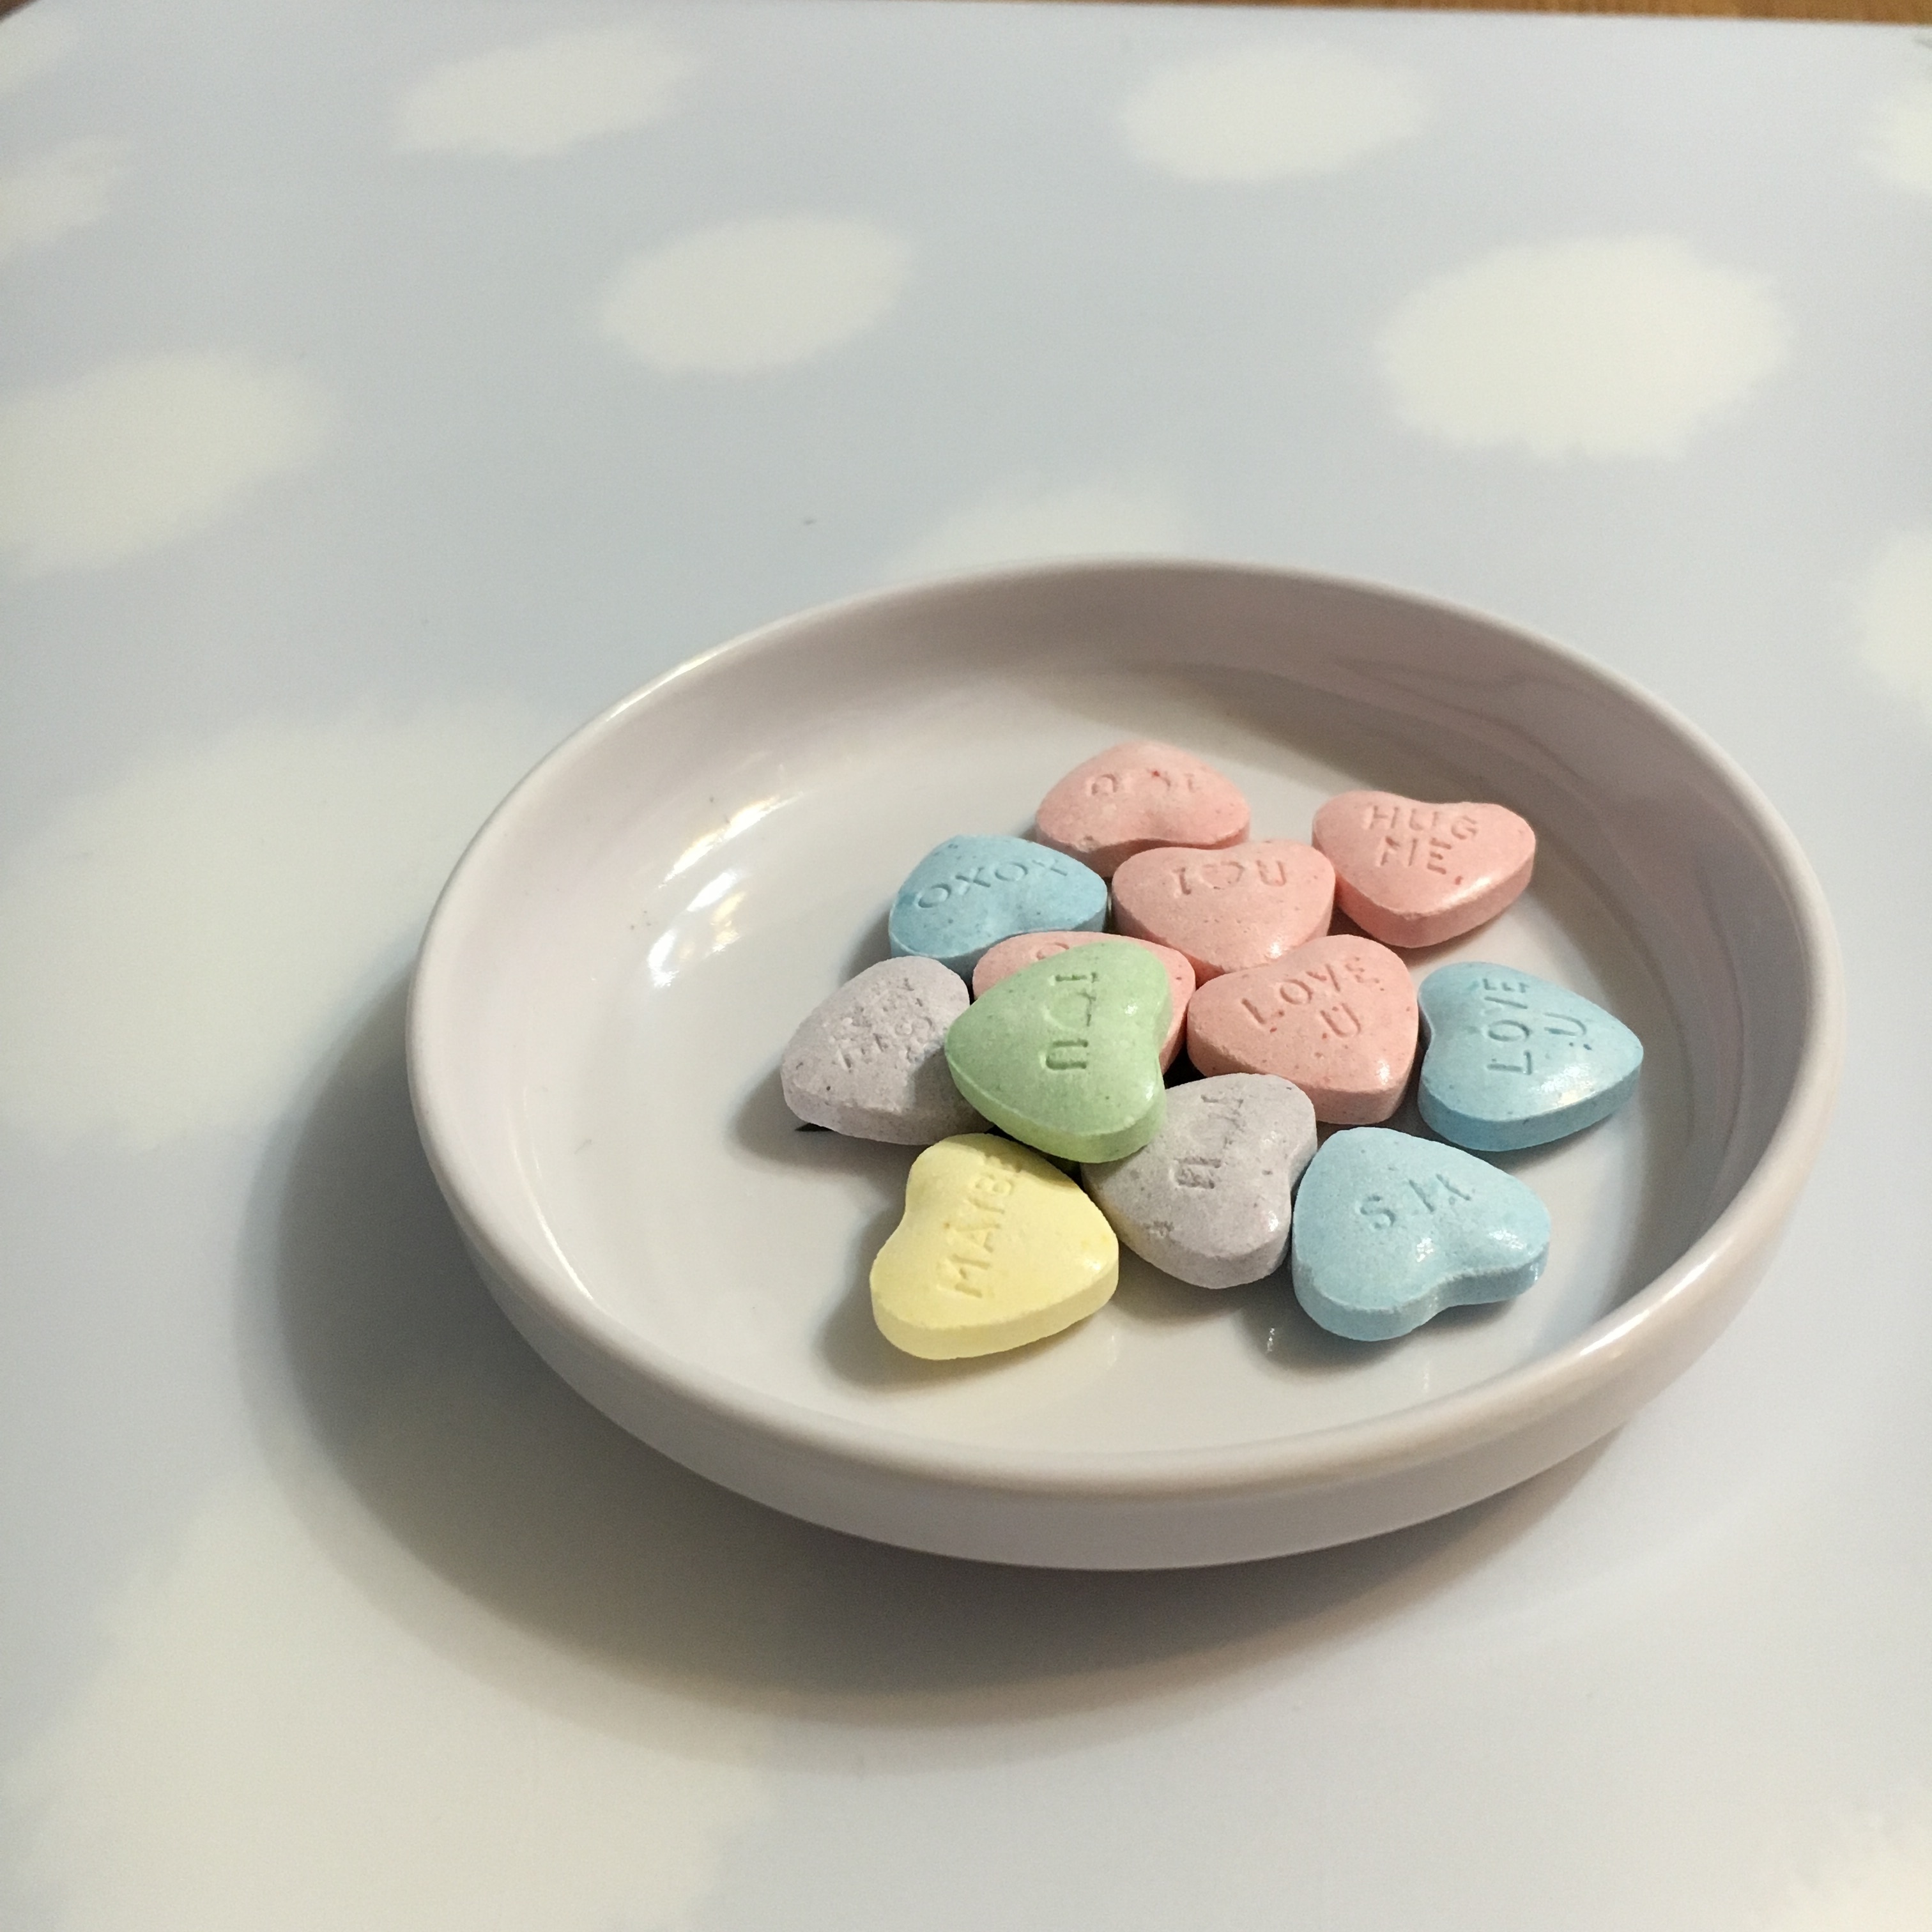 assorted colored heart shape medication pills